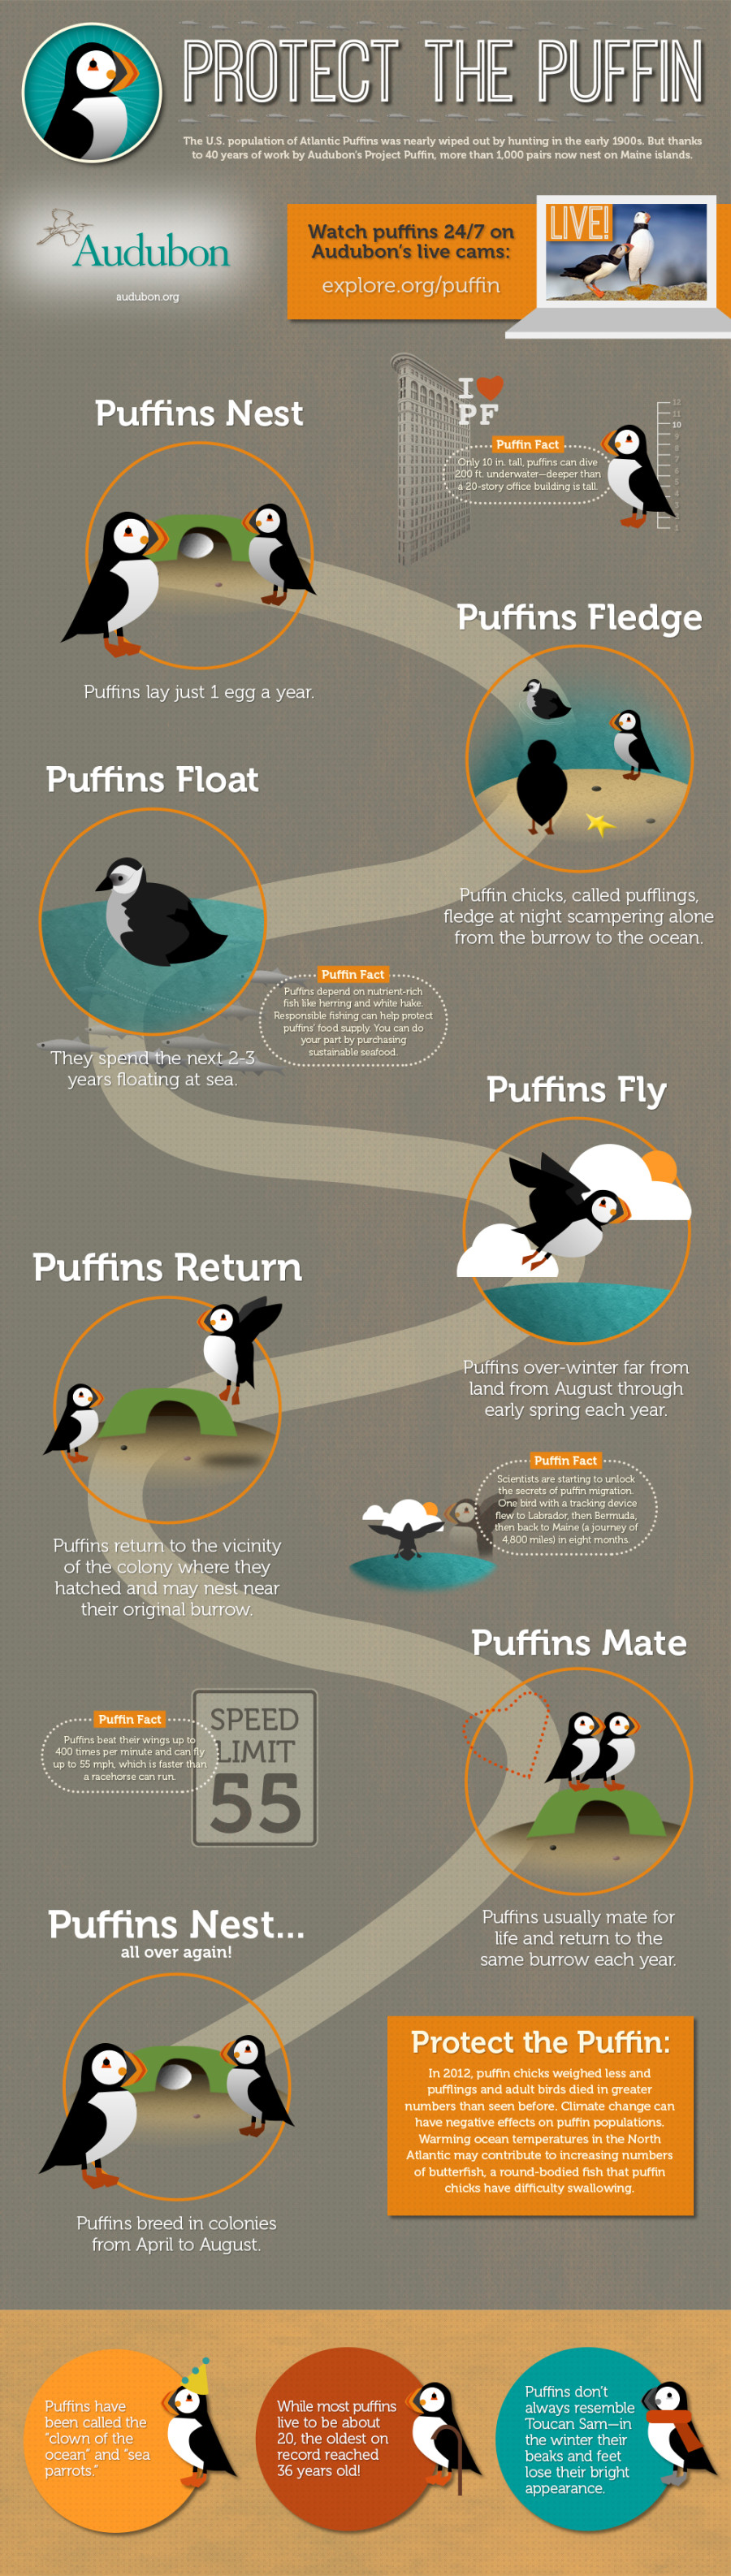 protect the puffin